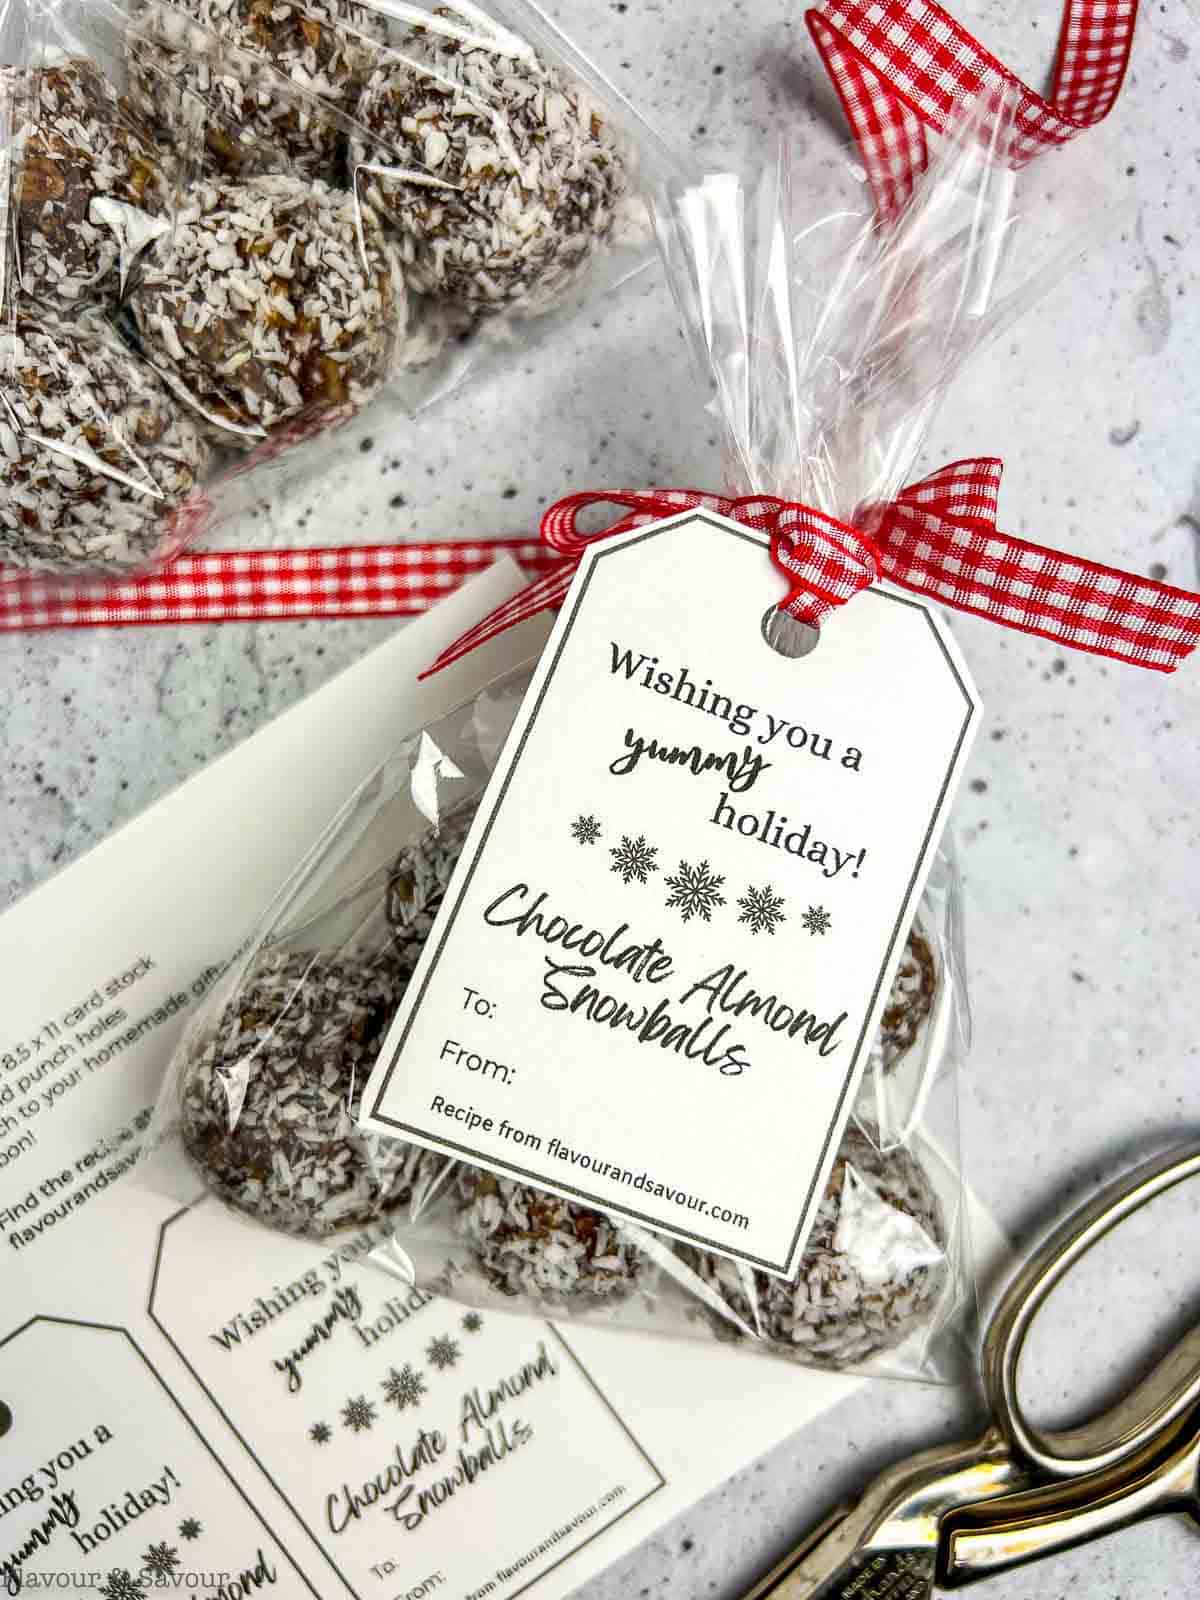 Chocolate almond snowballs with a printable gift tag and ribbon.